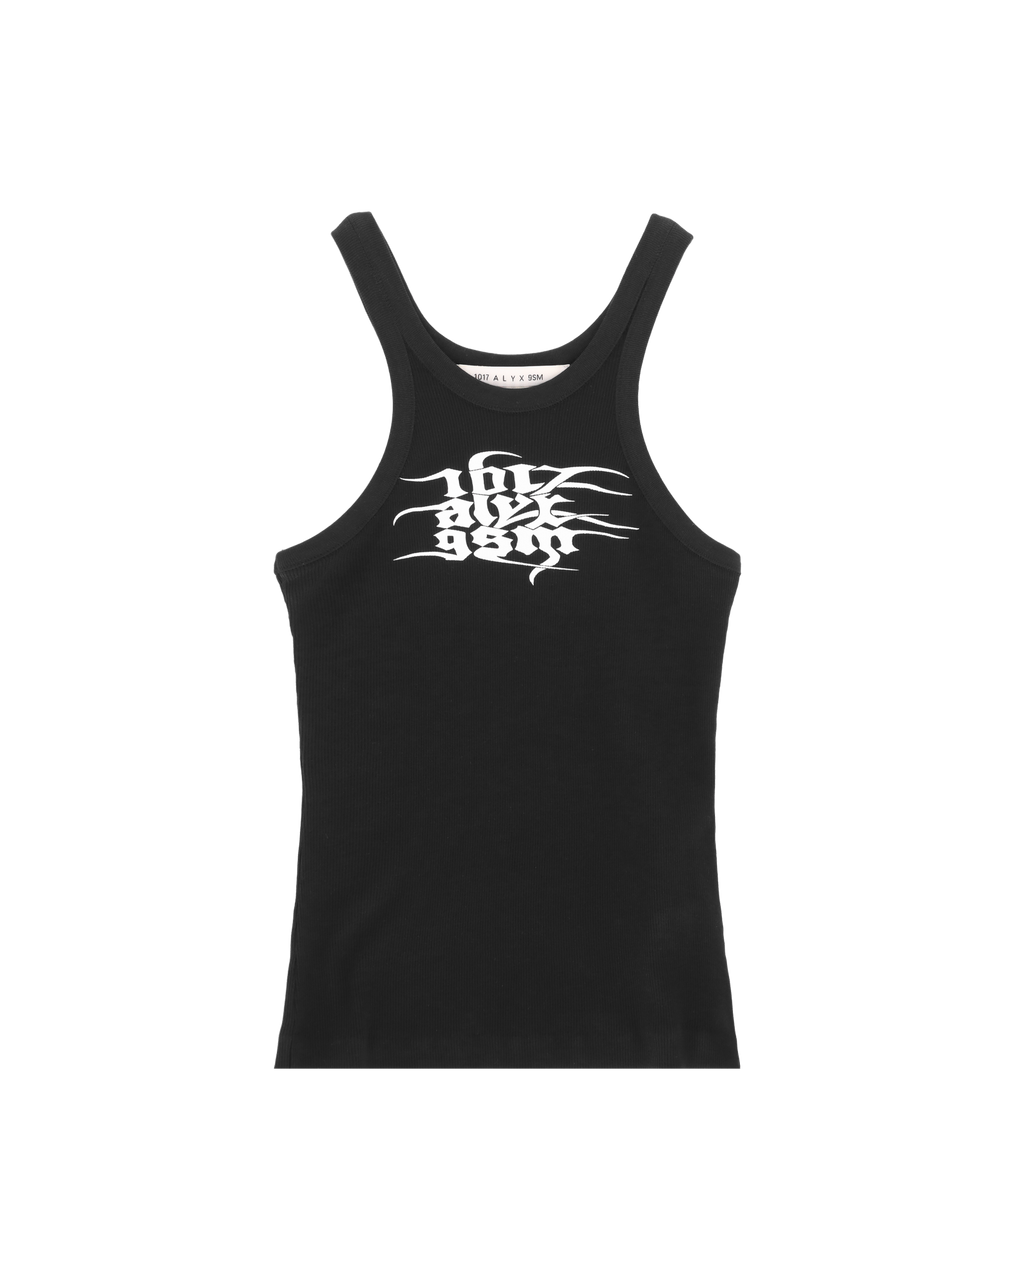 GRAPHIC TANK TOP